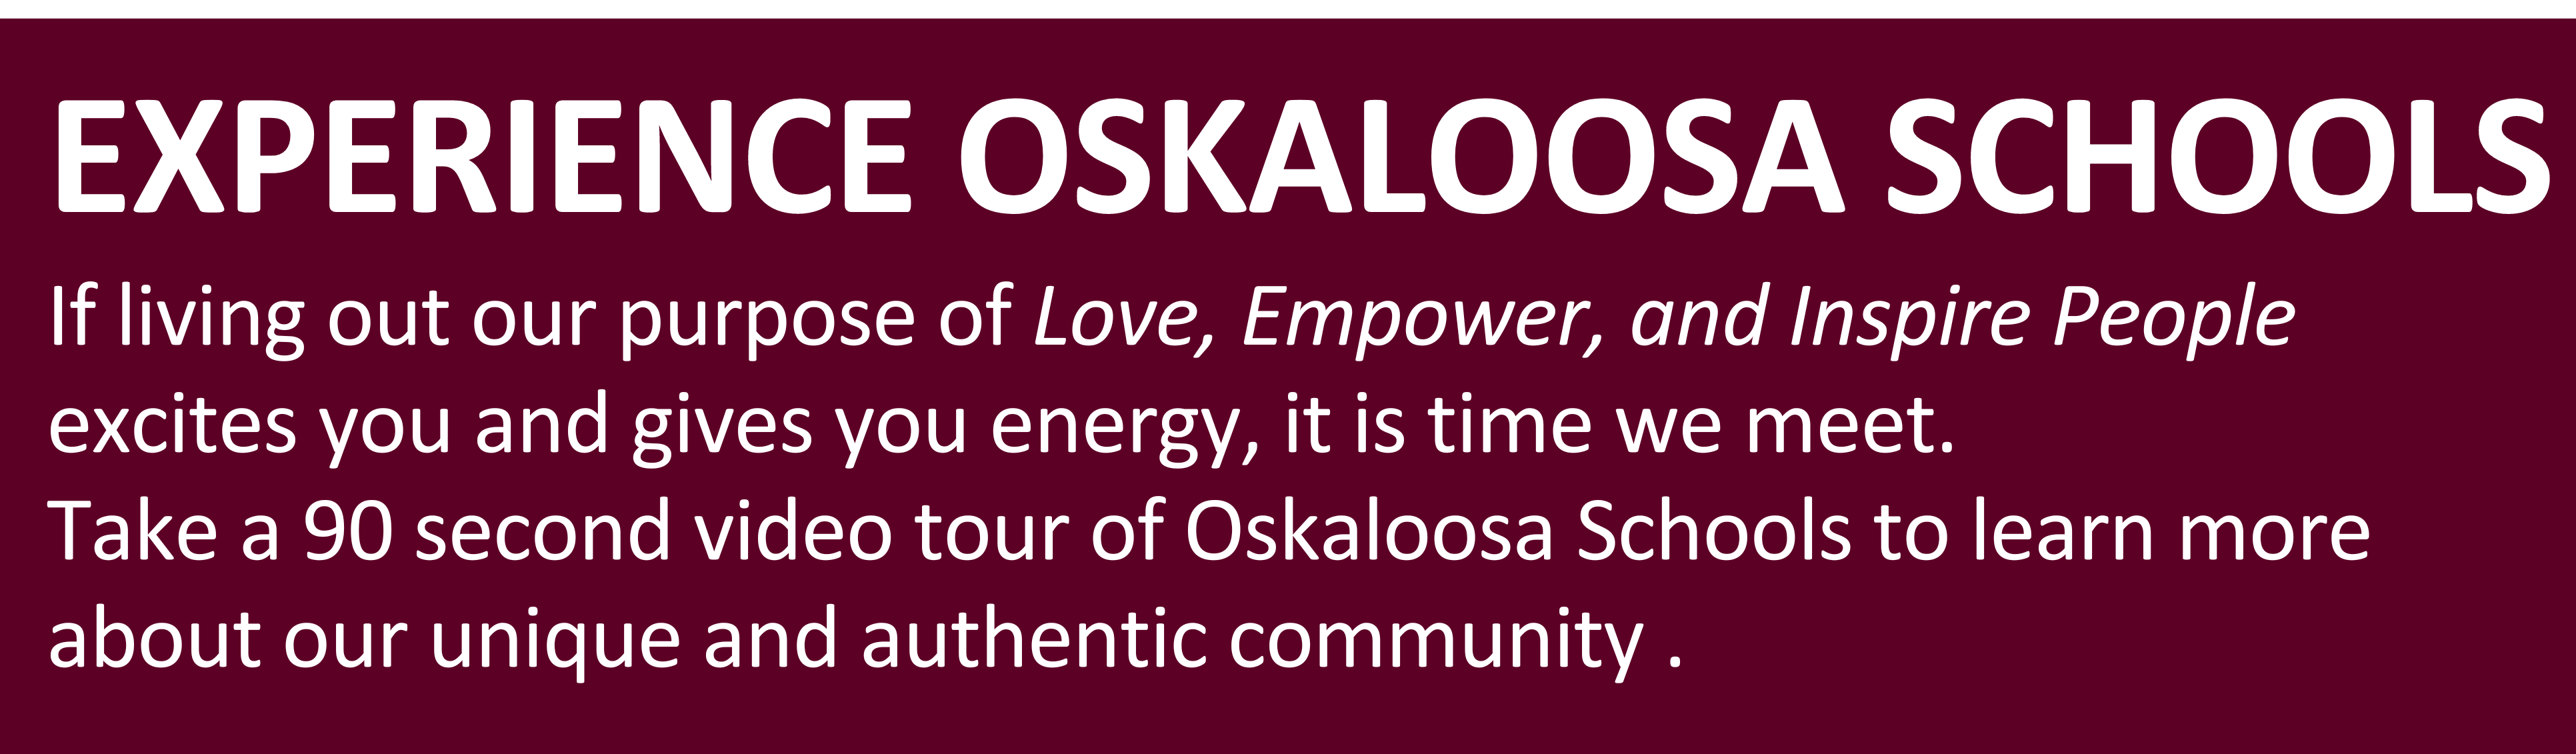 EXPERIENCE OSKALOOSA SCHOOLS: If living out our purpose of Love, Empower, and Inspire People  excites you and gives you energy, it is time we meet. Take a 90 second video tour of Oskaloosa Schools to learn more about our unique and authentic community .